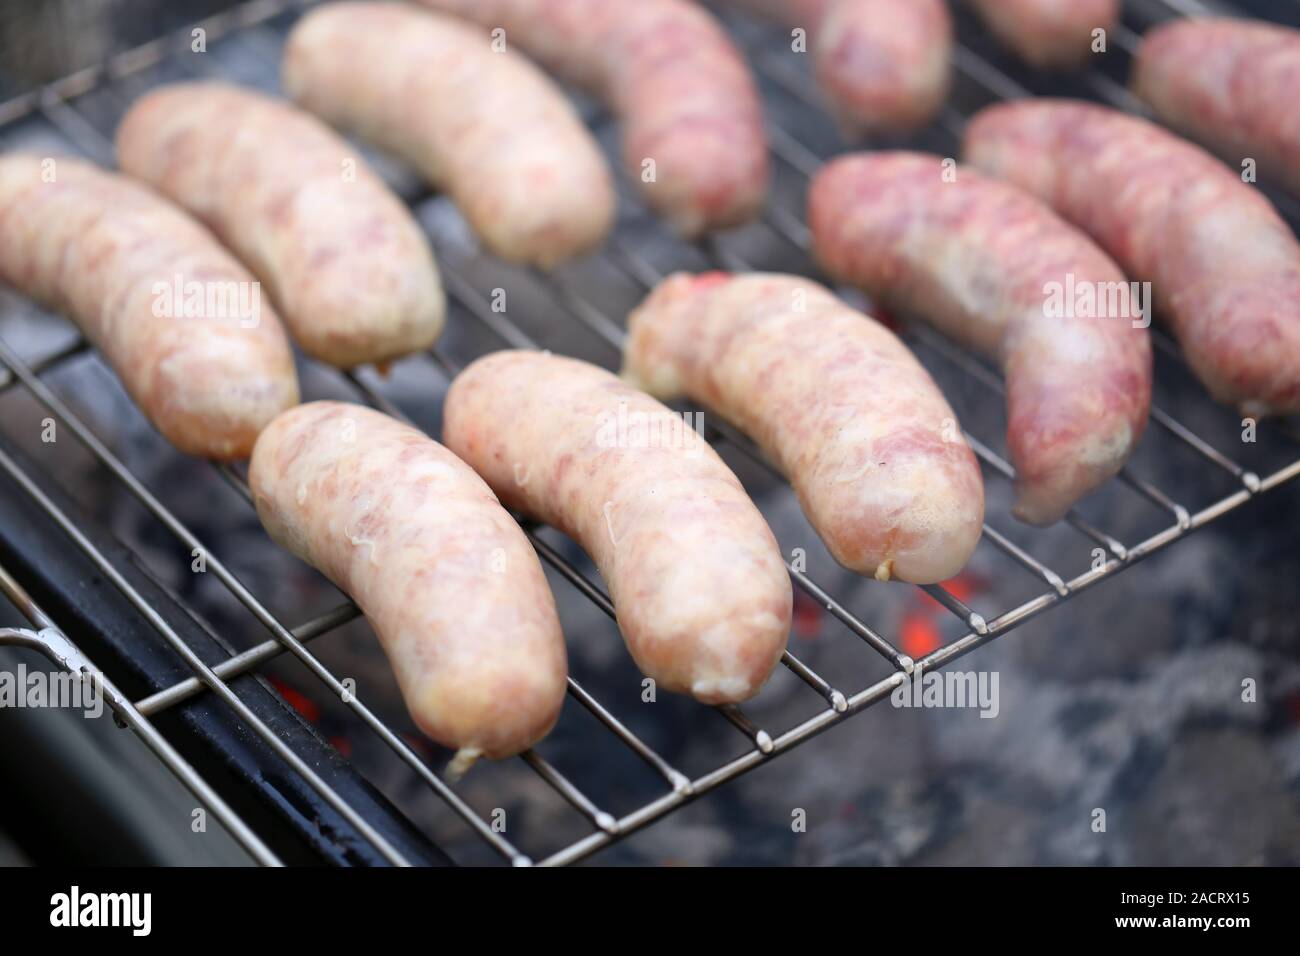 Fresh sausage grilling on a barbecue grill. Stock Photo